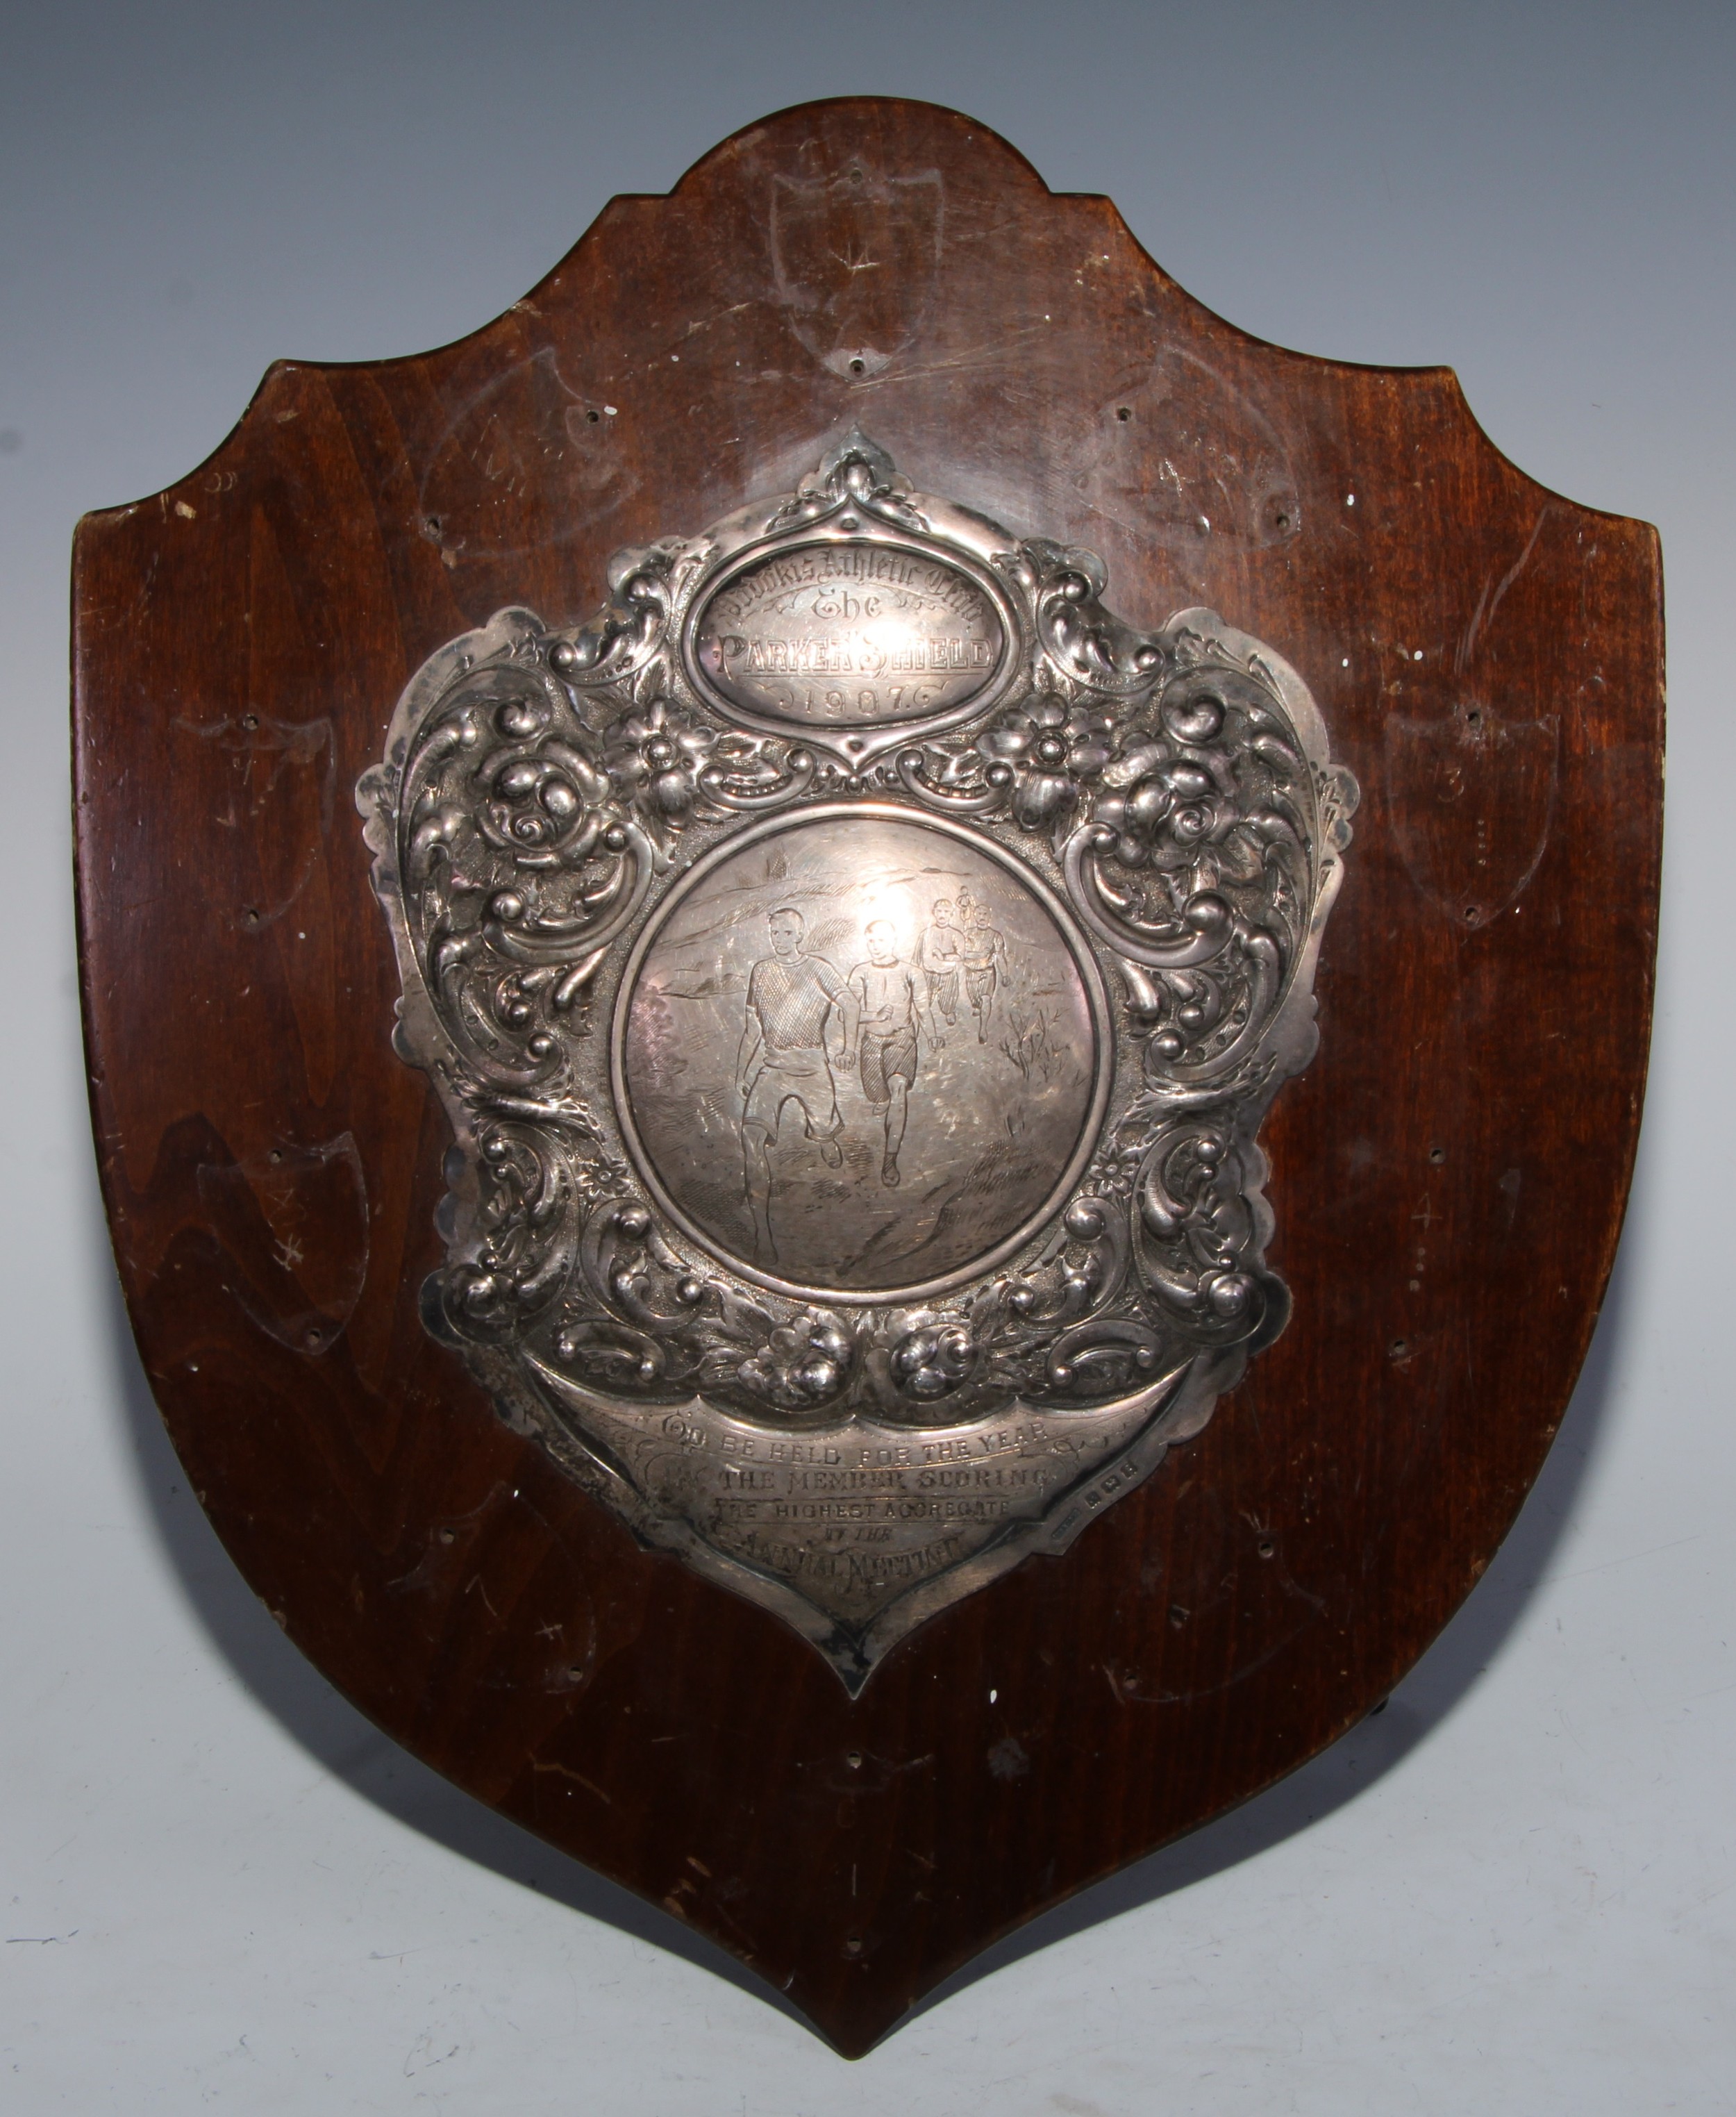 Sport - an Edwardian silver presentation trophy shield, The Parker Shield, engraved with athletes